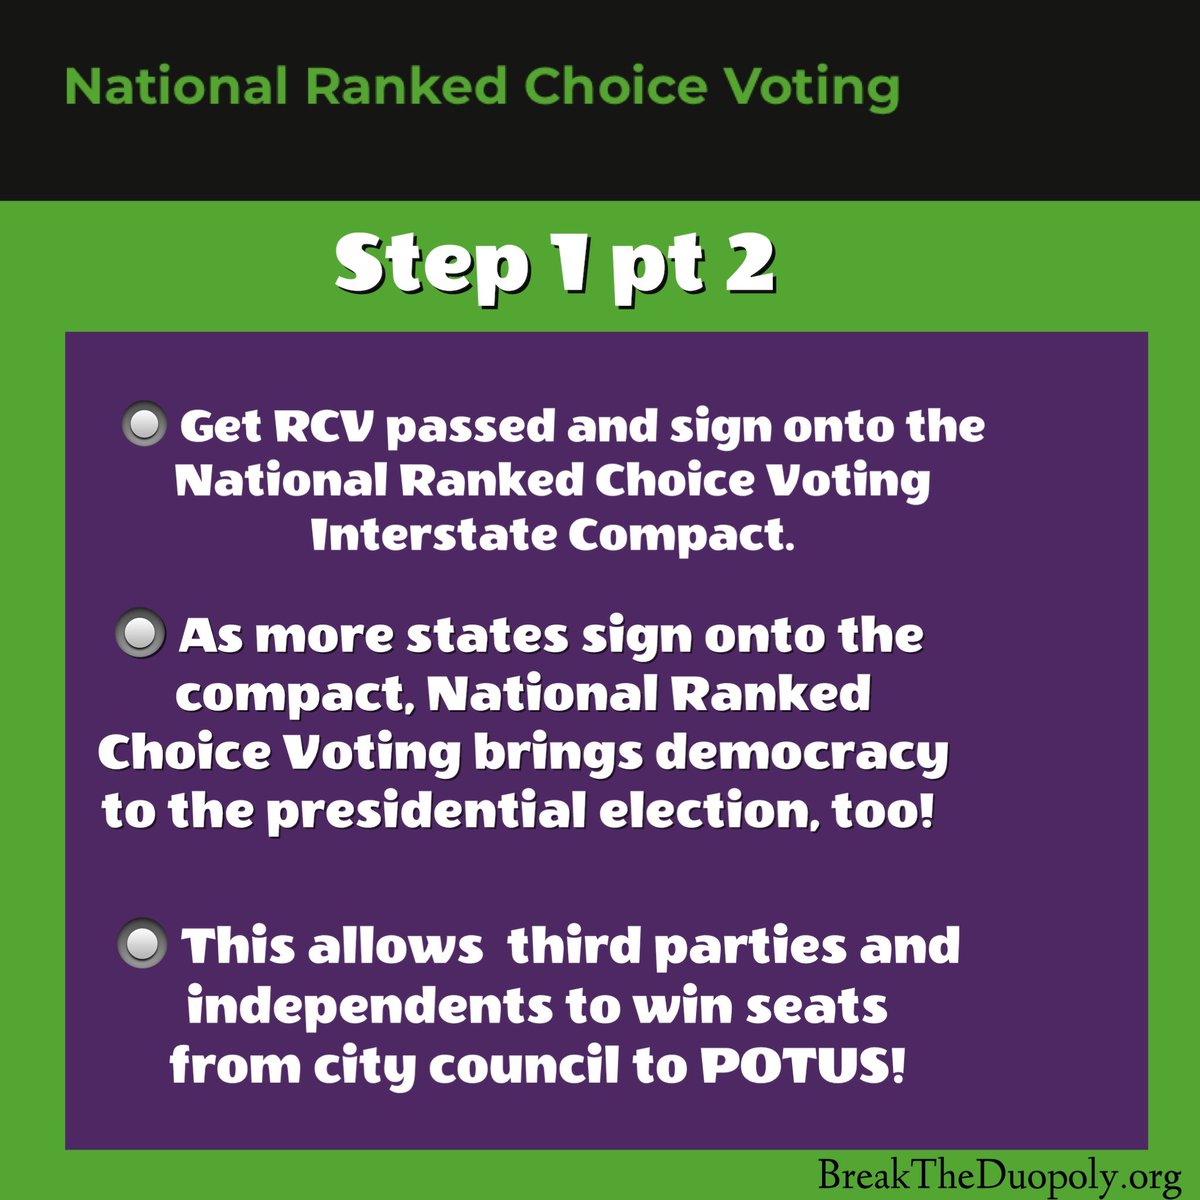 We need to truly  http://BreakTheDuopoly.org  w/  #NationalRankedChoiceVoting. It would restore  #democracy! My thread of  #DownBallotProgressives that includes  #NotMeUs + some w/  #YangGang! Donate:  http://nationalrankedchoicevoting.org/donate Follow  @nrcvorg  @TheRagtagBand 